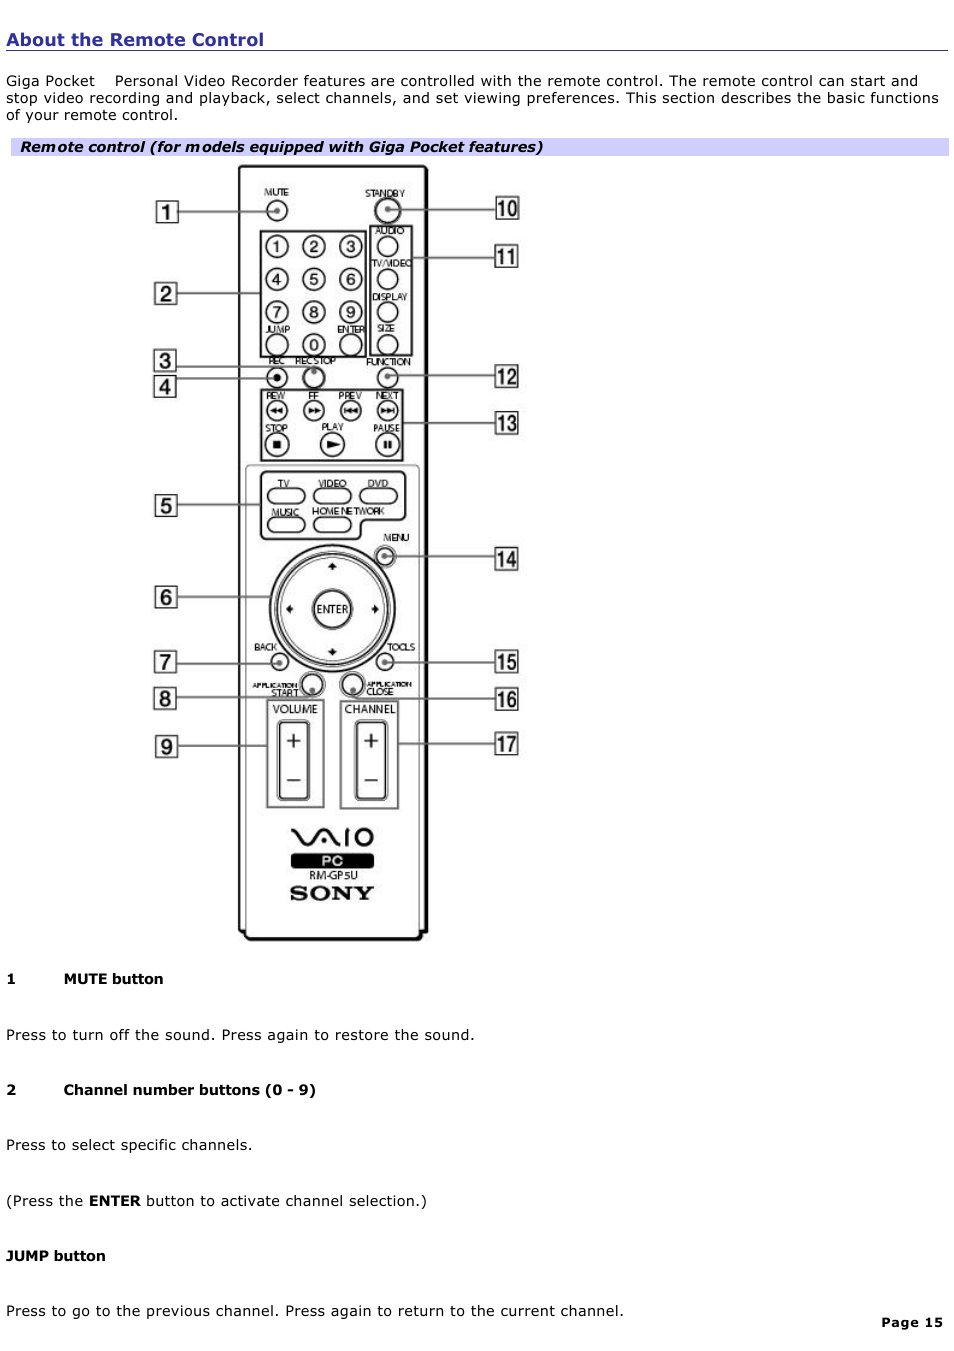 About the remote control | Sony PCV-RS411 User Manual | Page 15 / 146